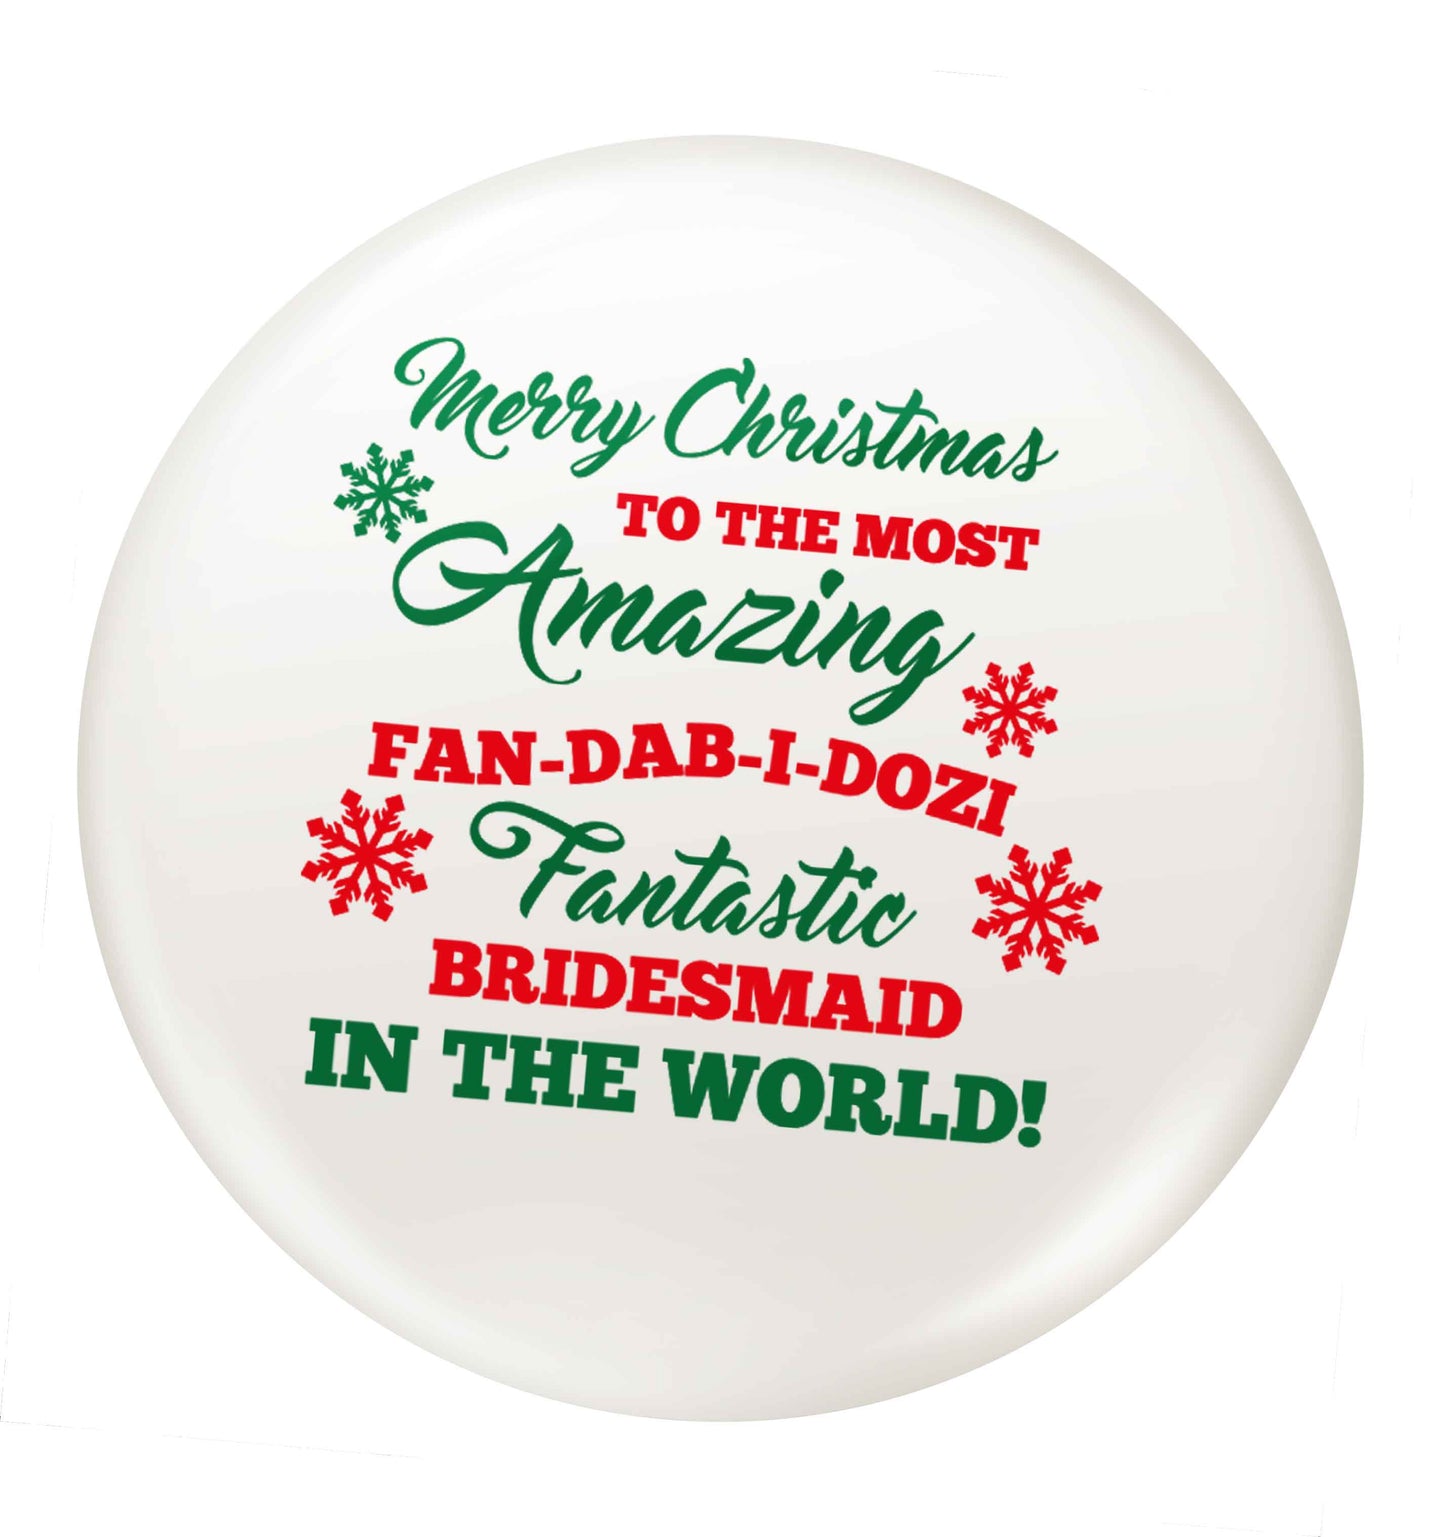 Merry Christmas to the most amazing fan-dab-i-dozi fantasic bridesmaid in the world small 25mm Pin badge